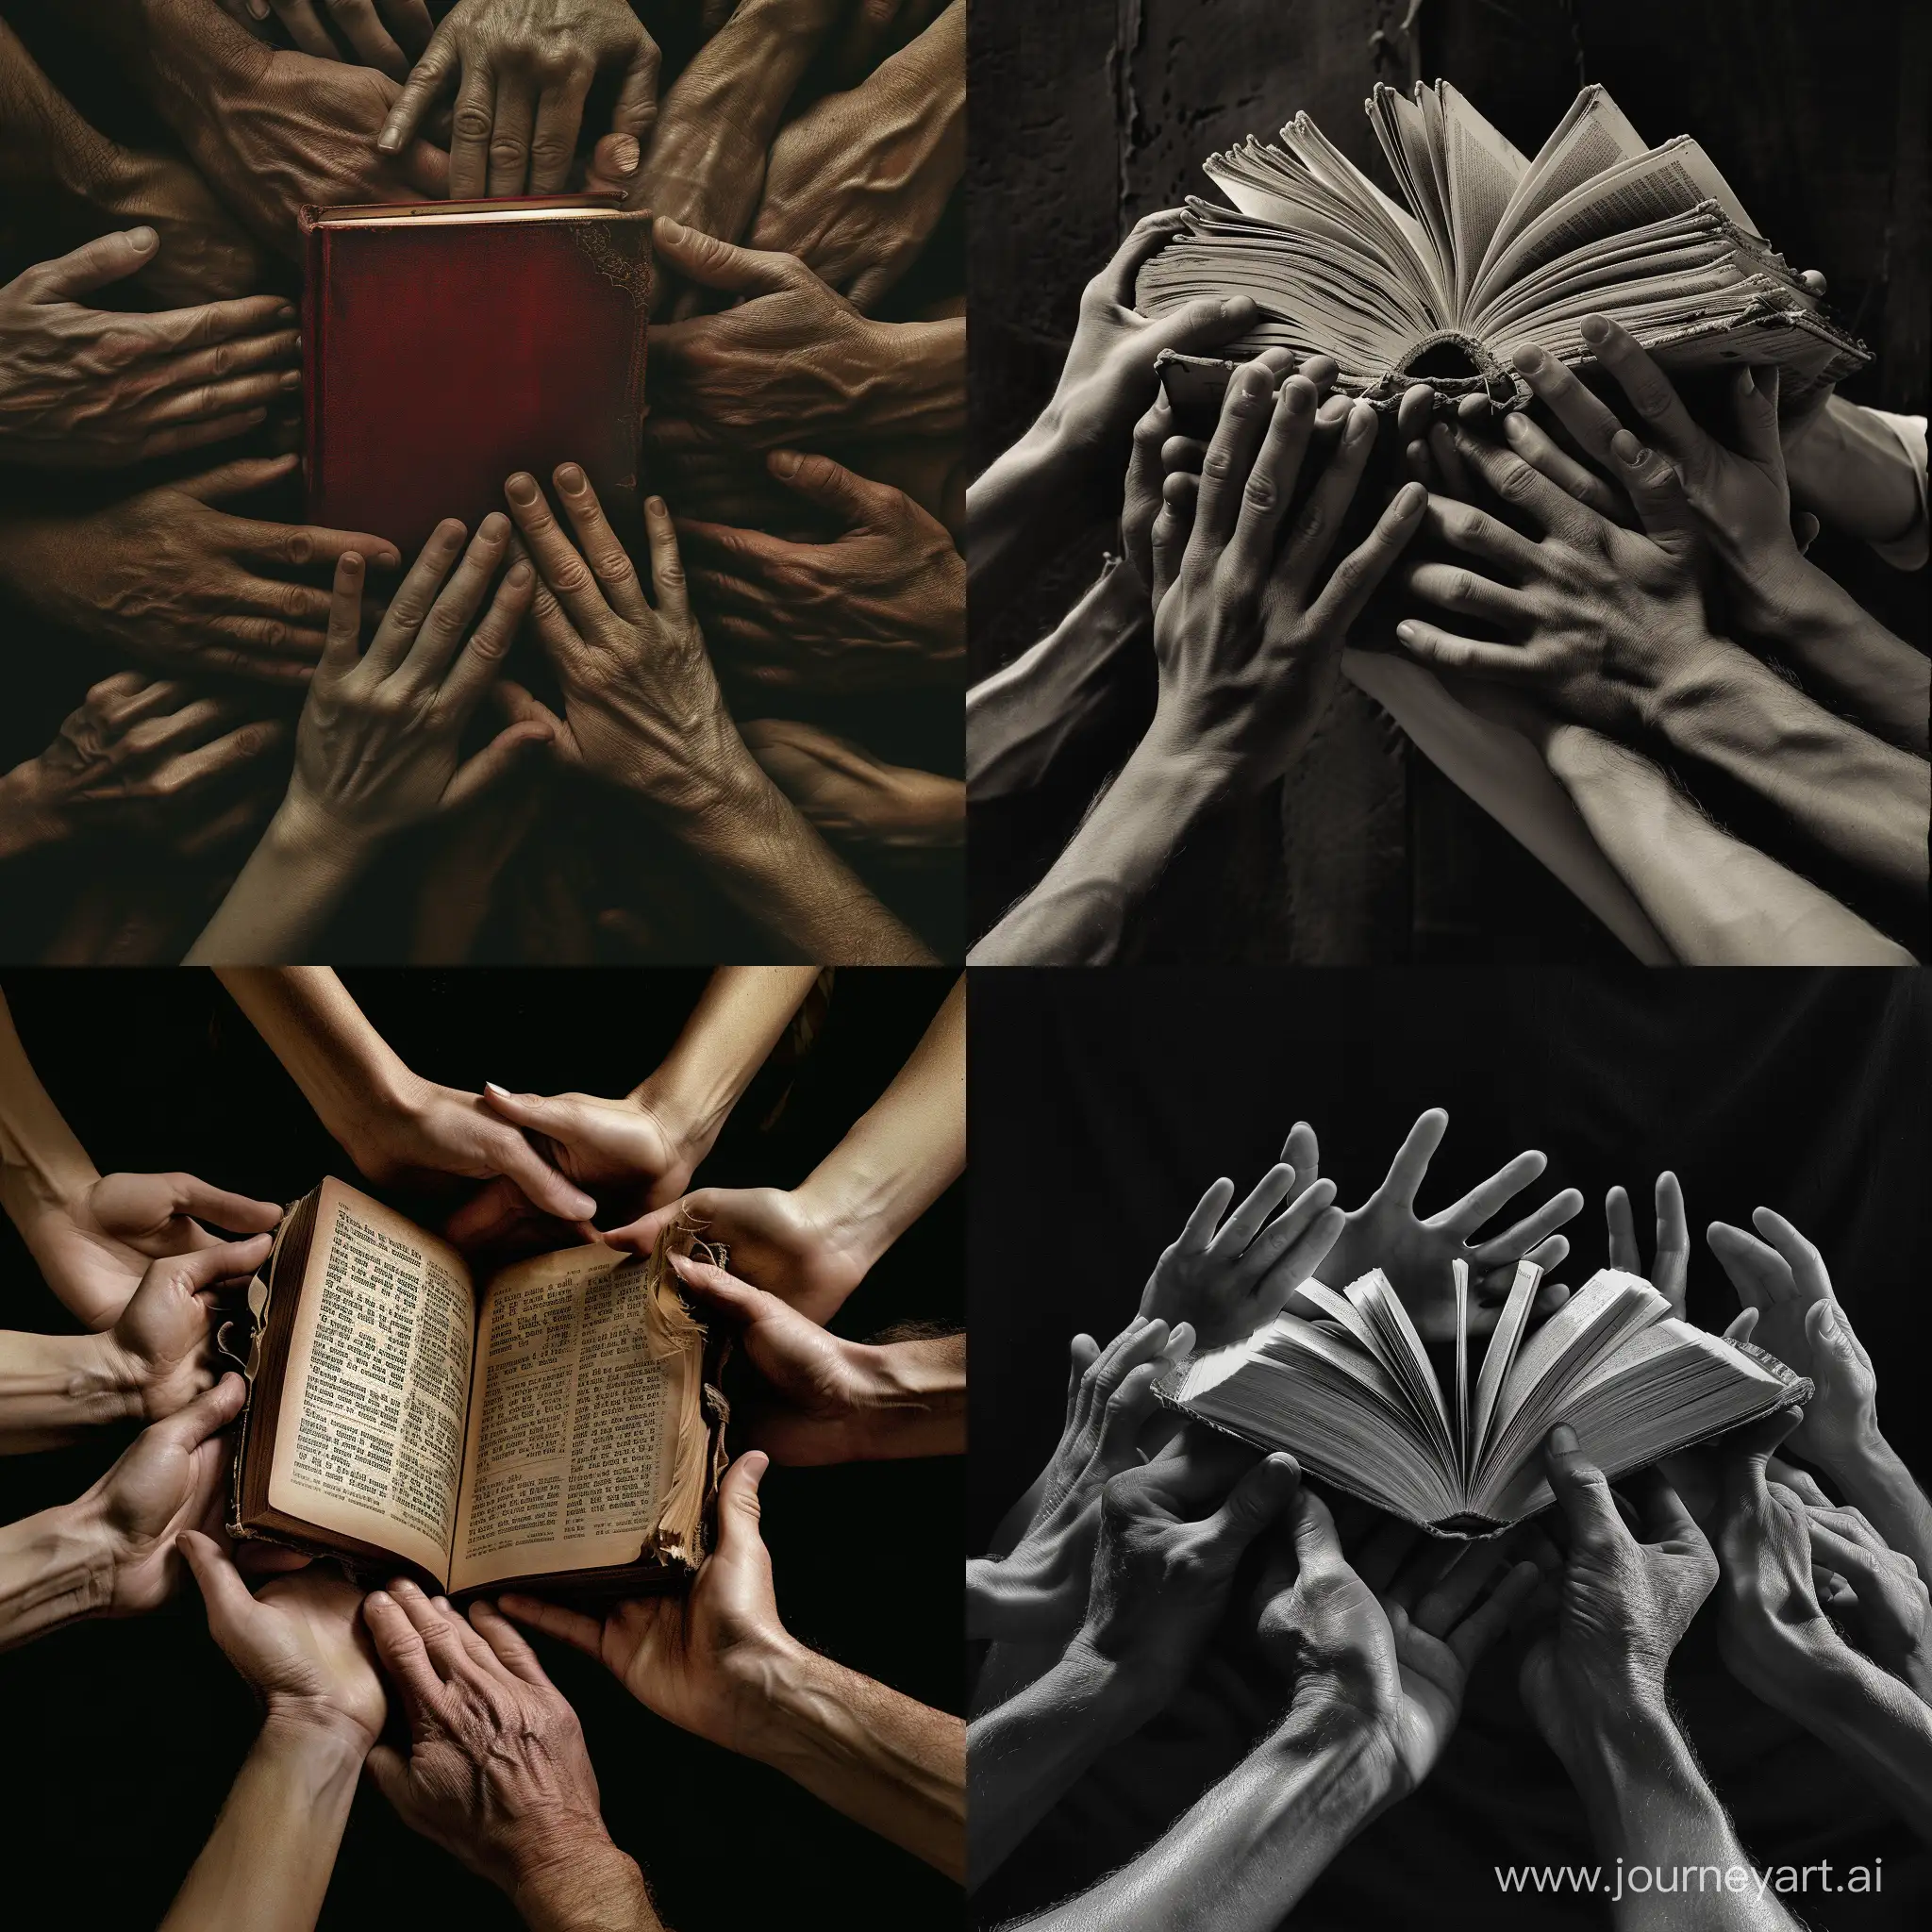 The hands of many people have taken the book